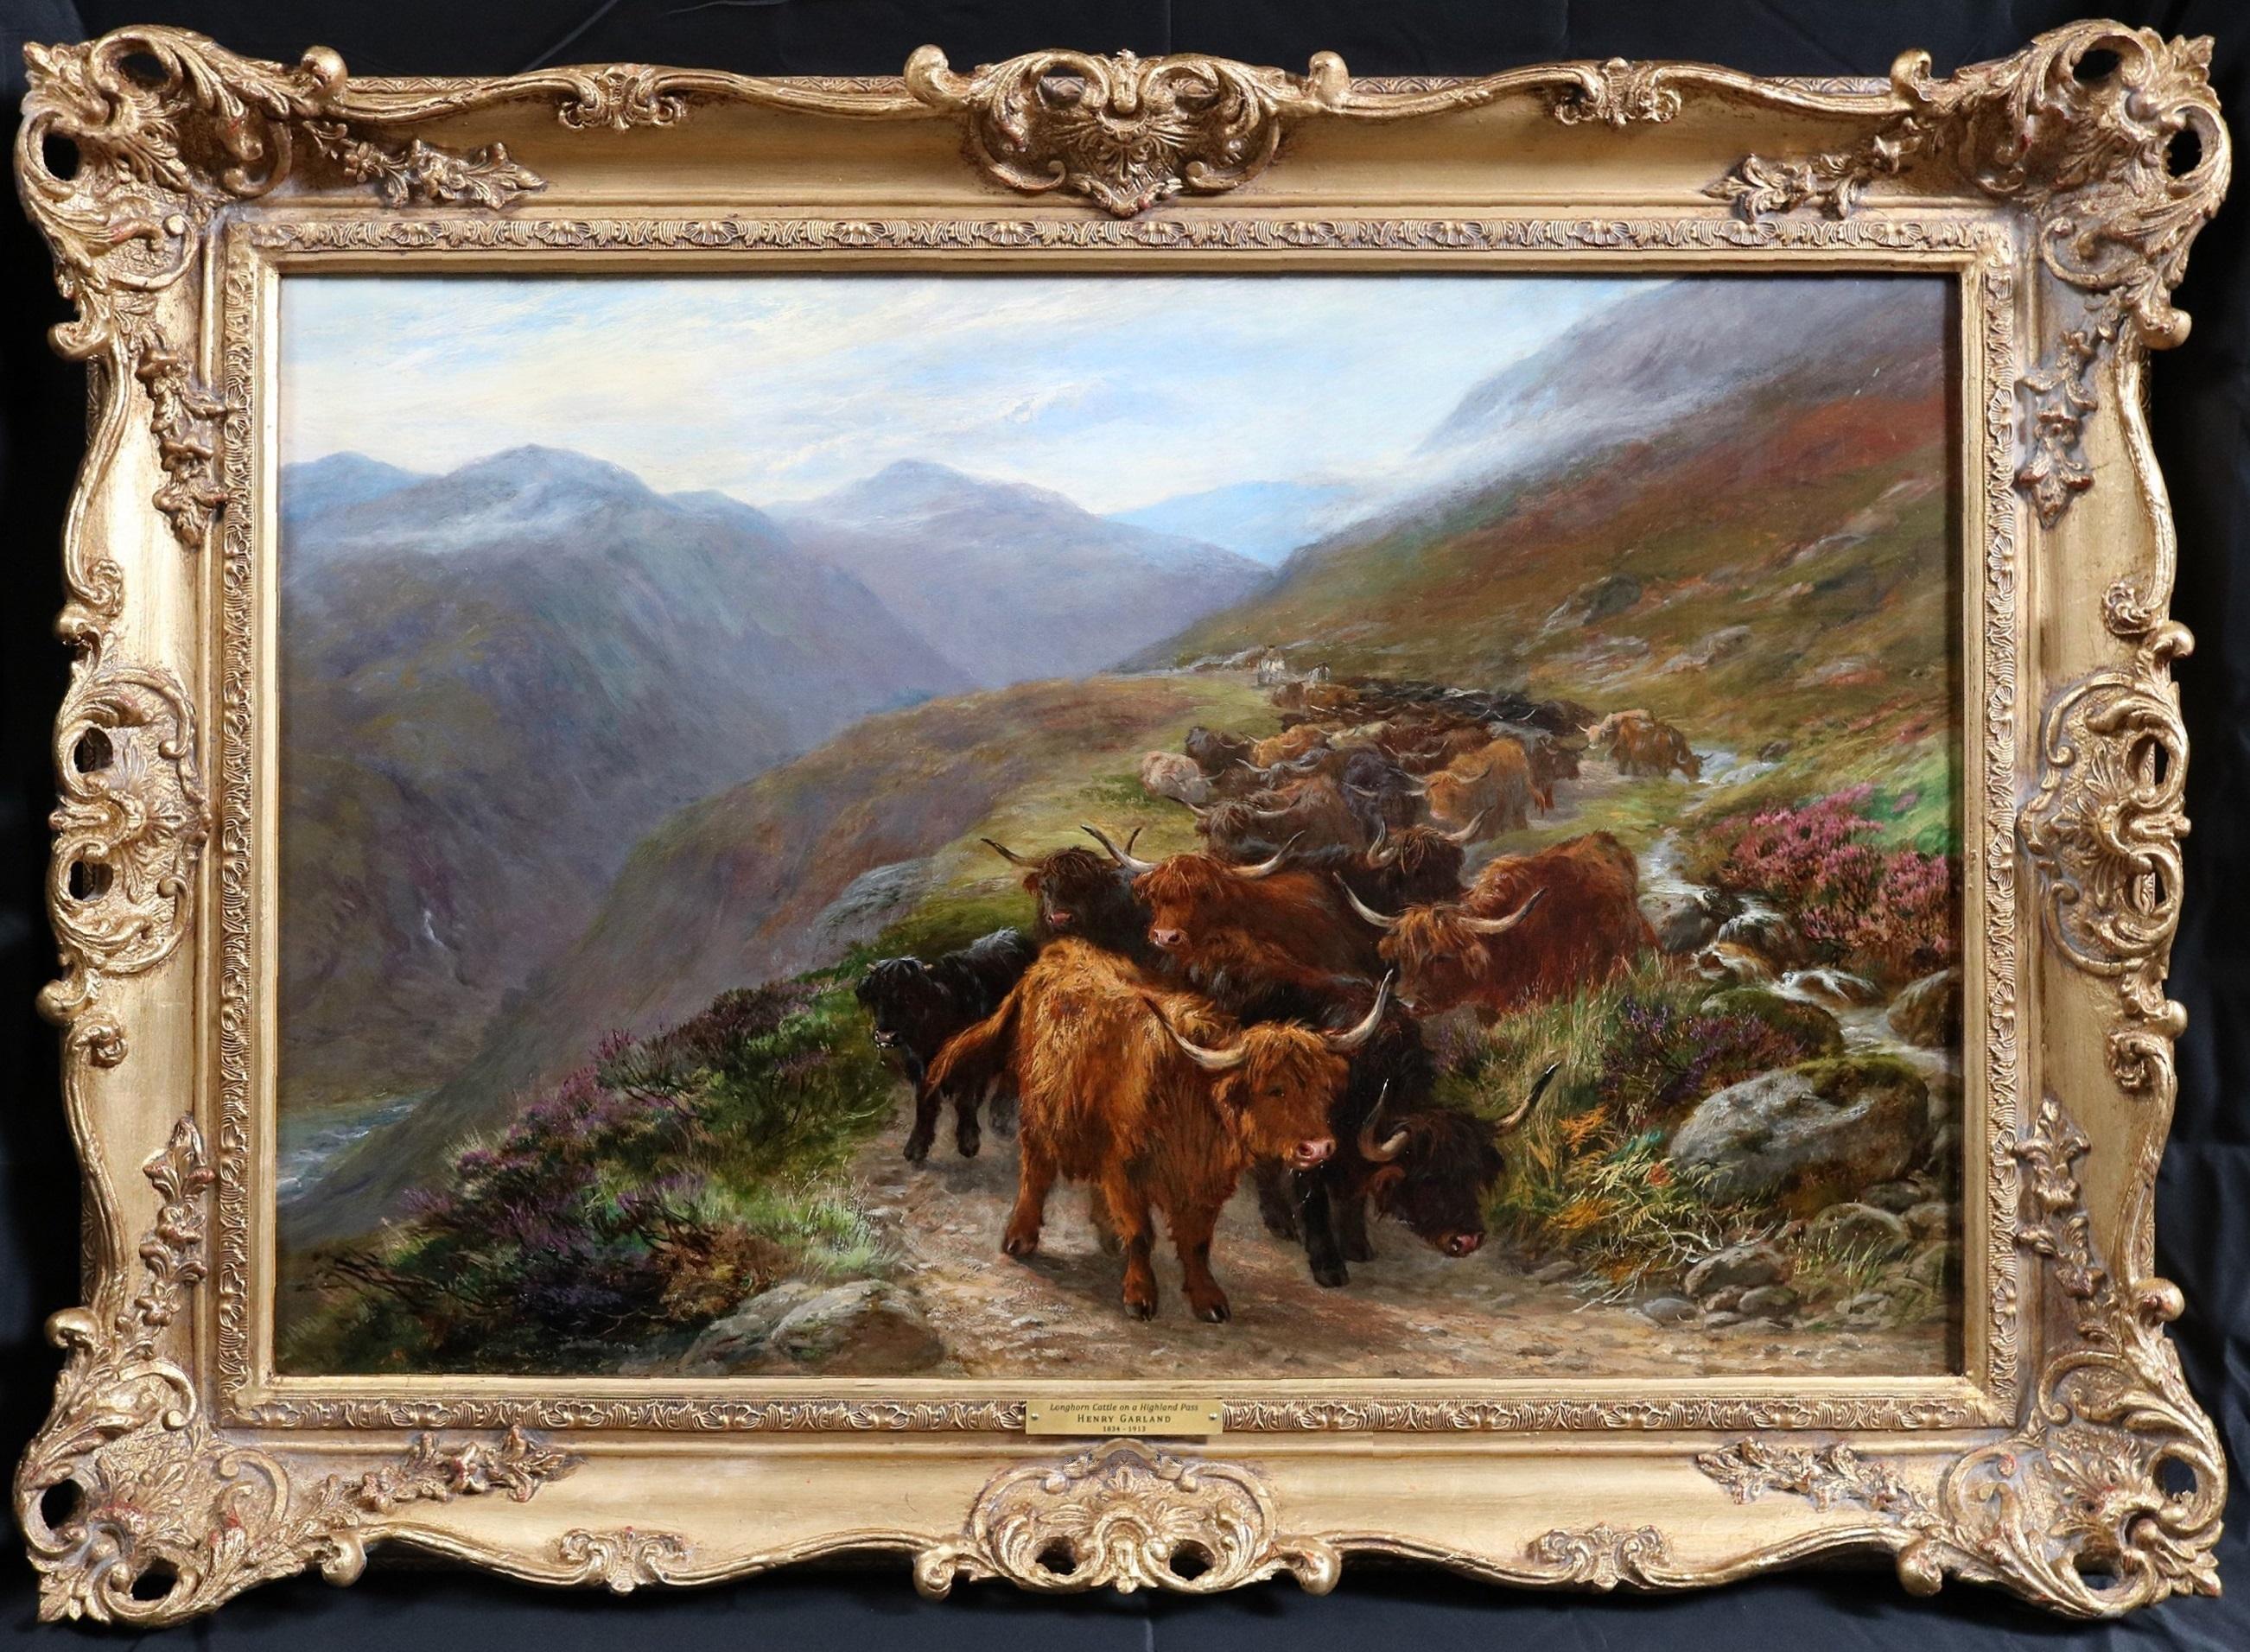 Longhorn Cattle on Highland Pass - 19th Century Oil Painting Scottish Landscape - Brown Animal Painting by Henry Garland